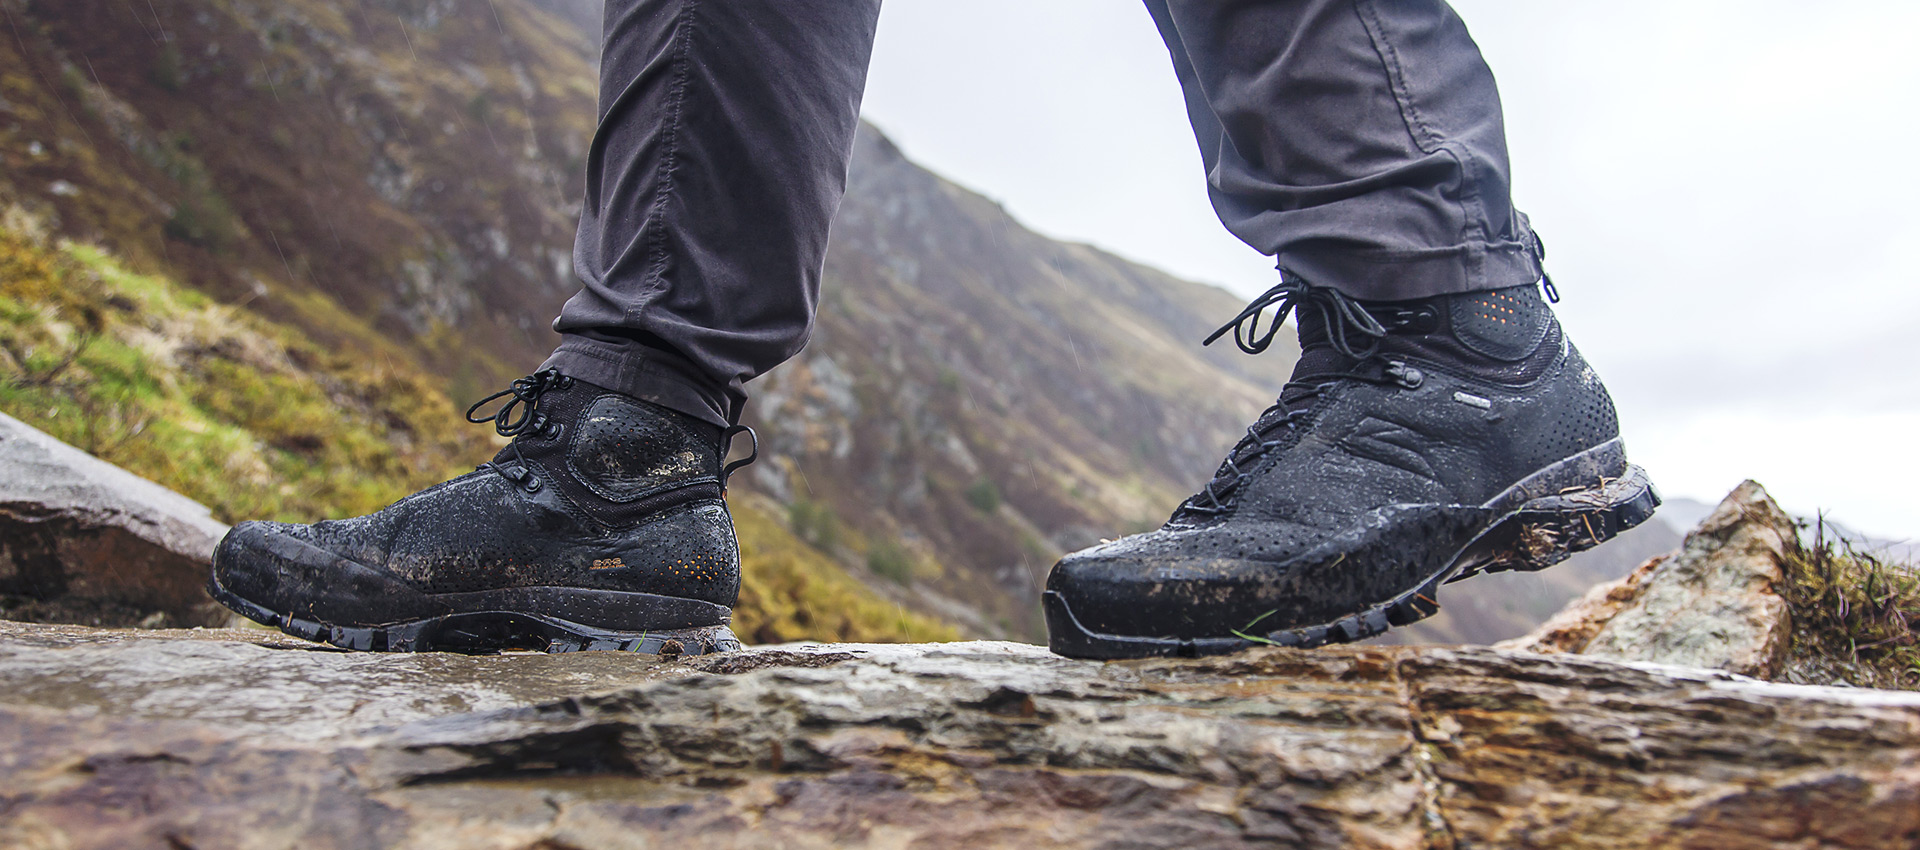 2019 best hiking boots